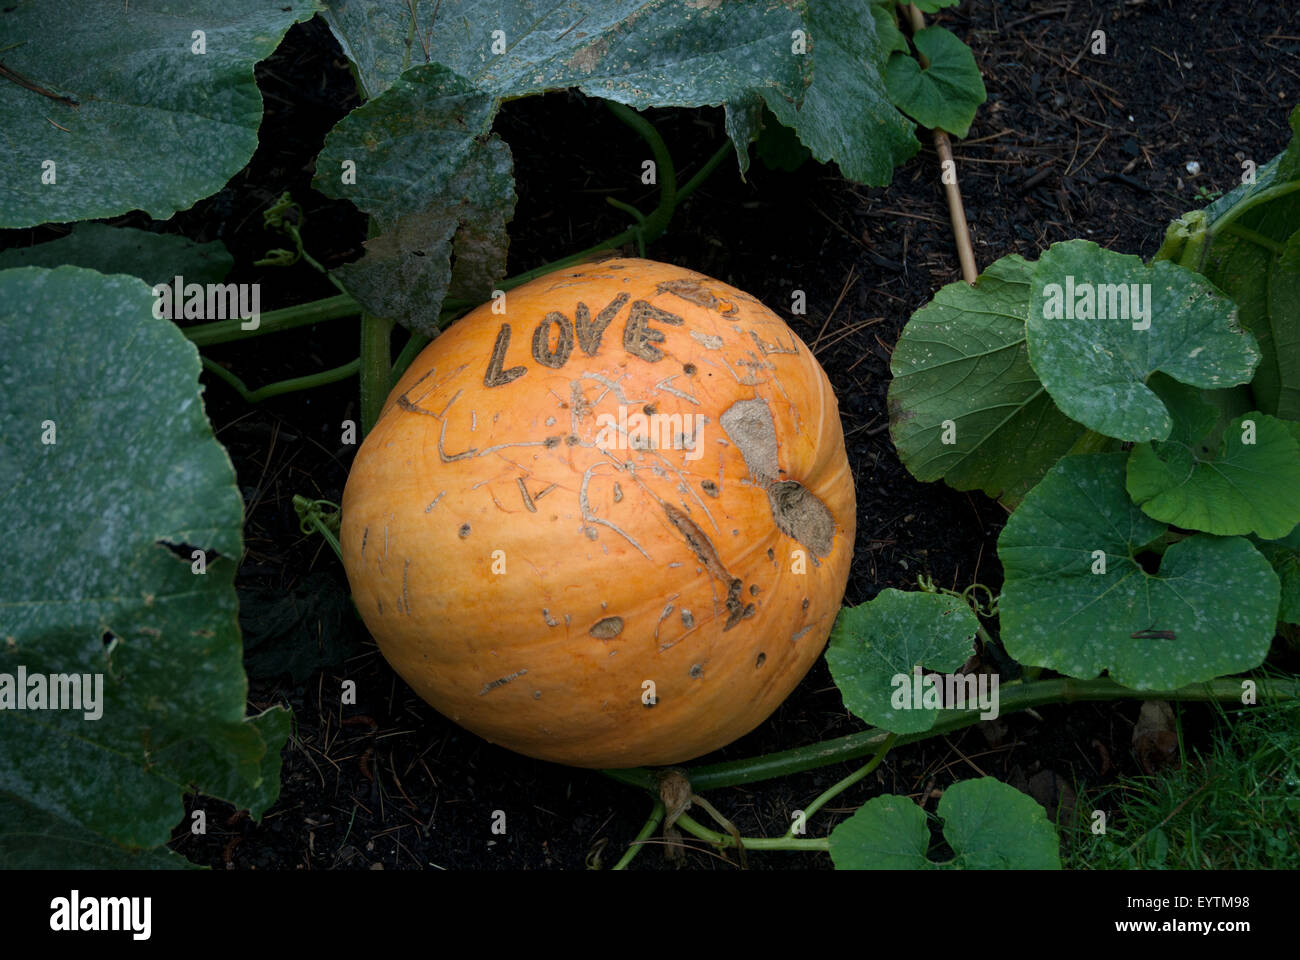 One pumpkin growing in a vegetable patch in a west London garden, England UK Stock Photo